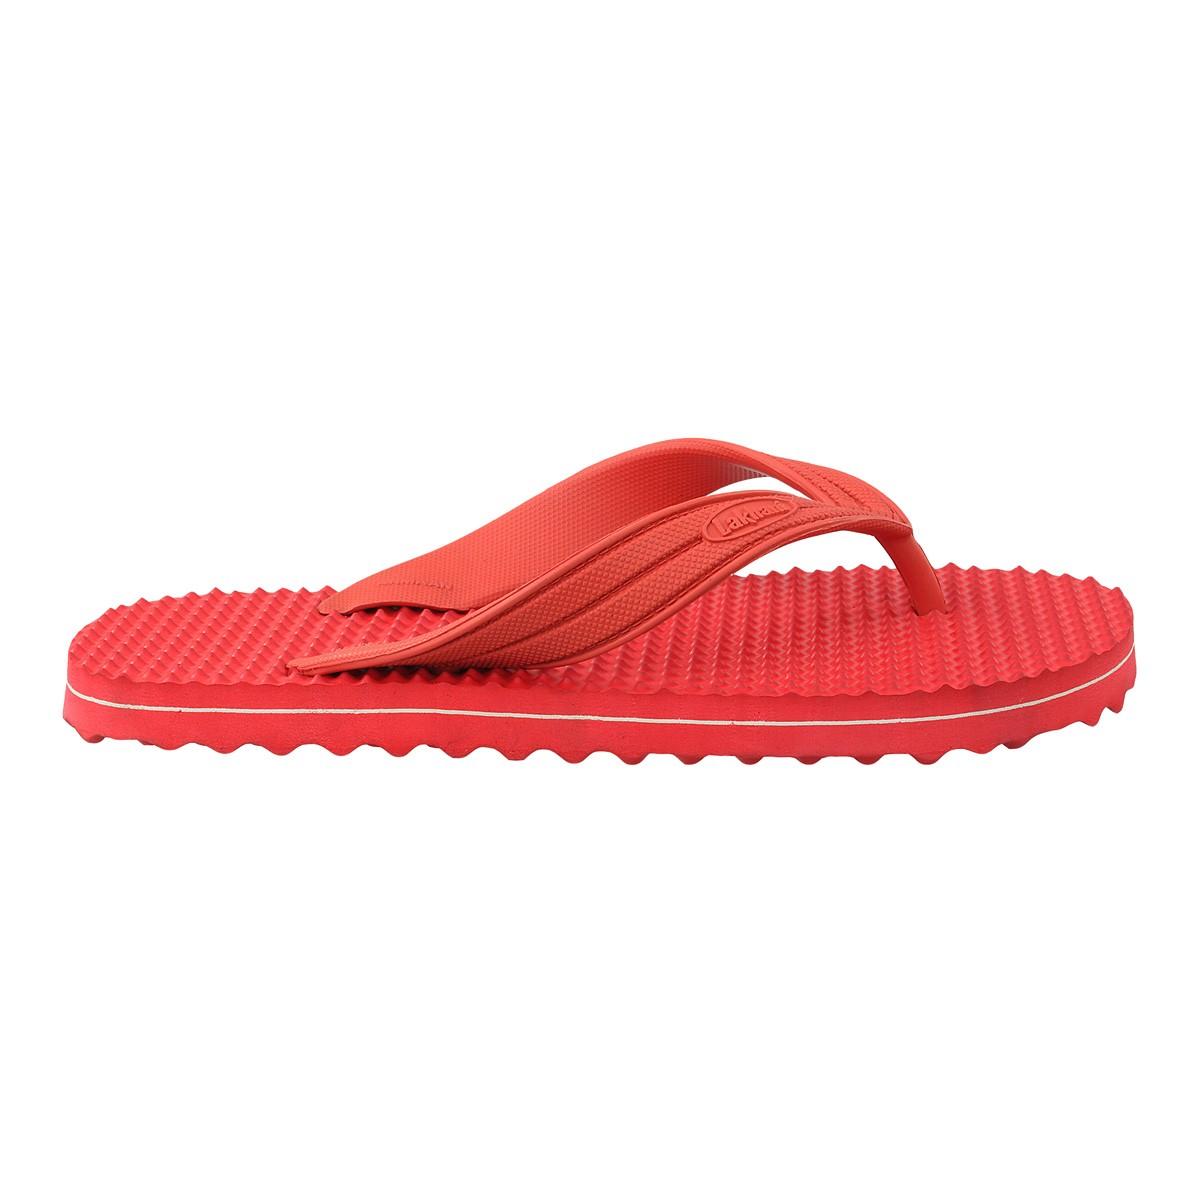 Buy Good Quality Slippers Online at Best Prices! Check Here!